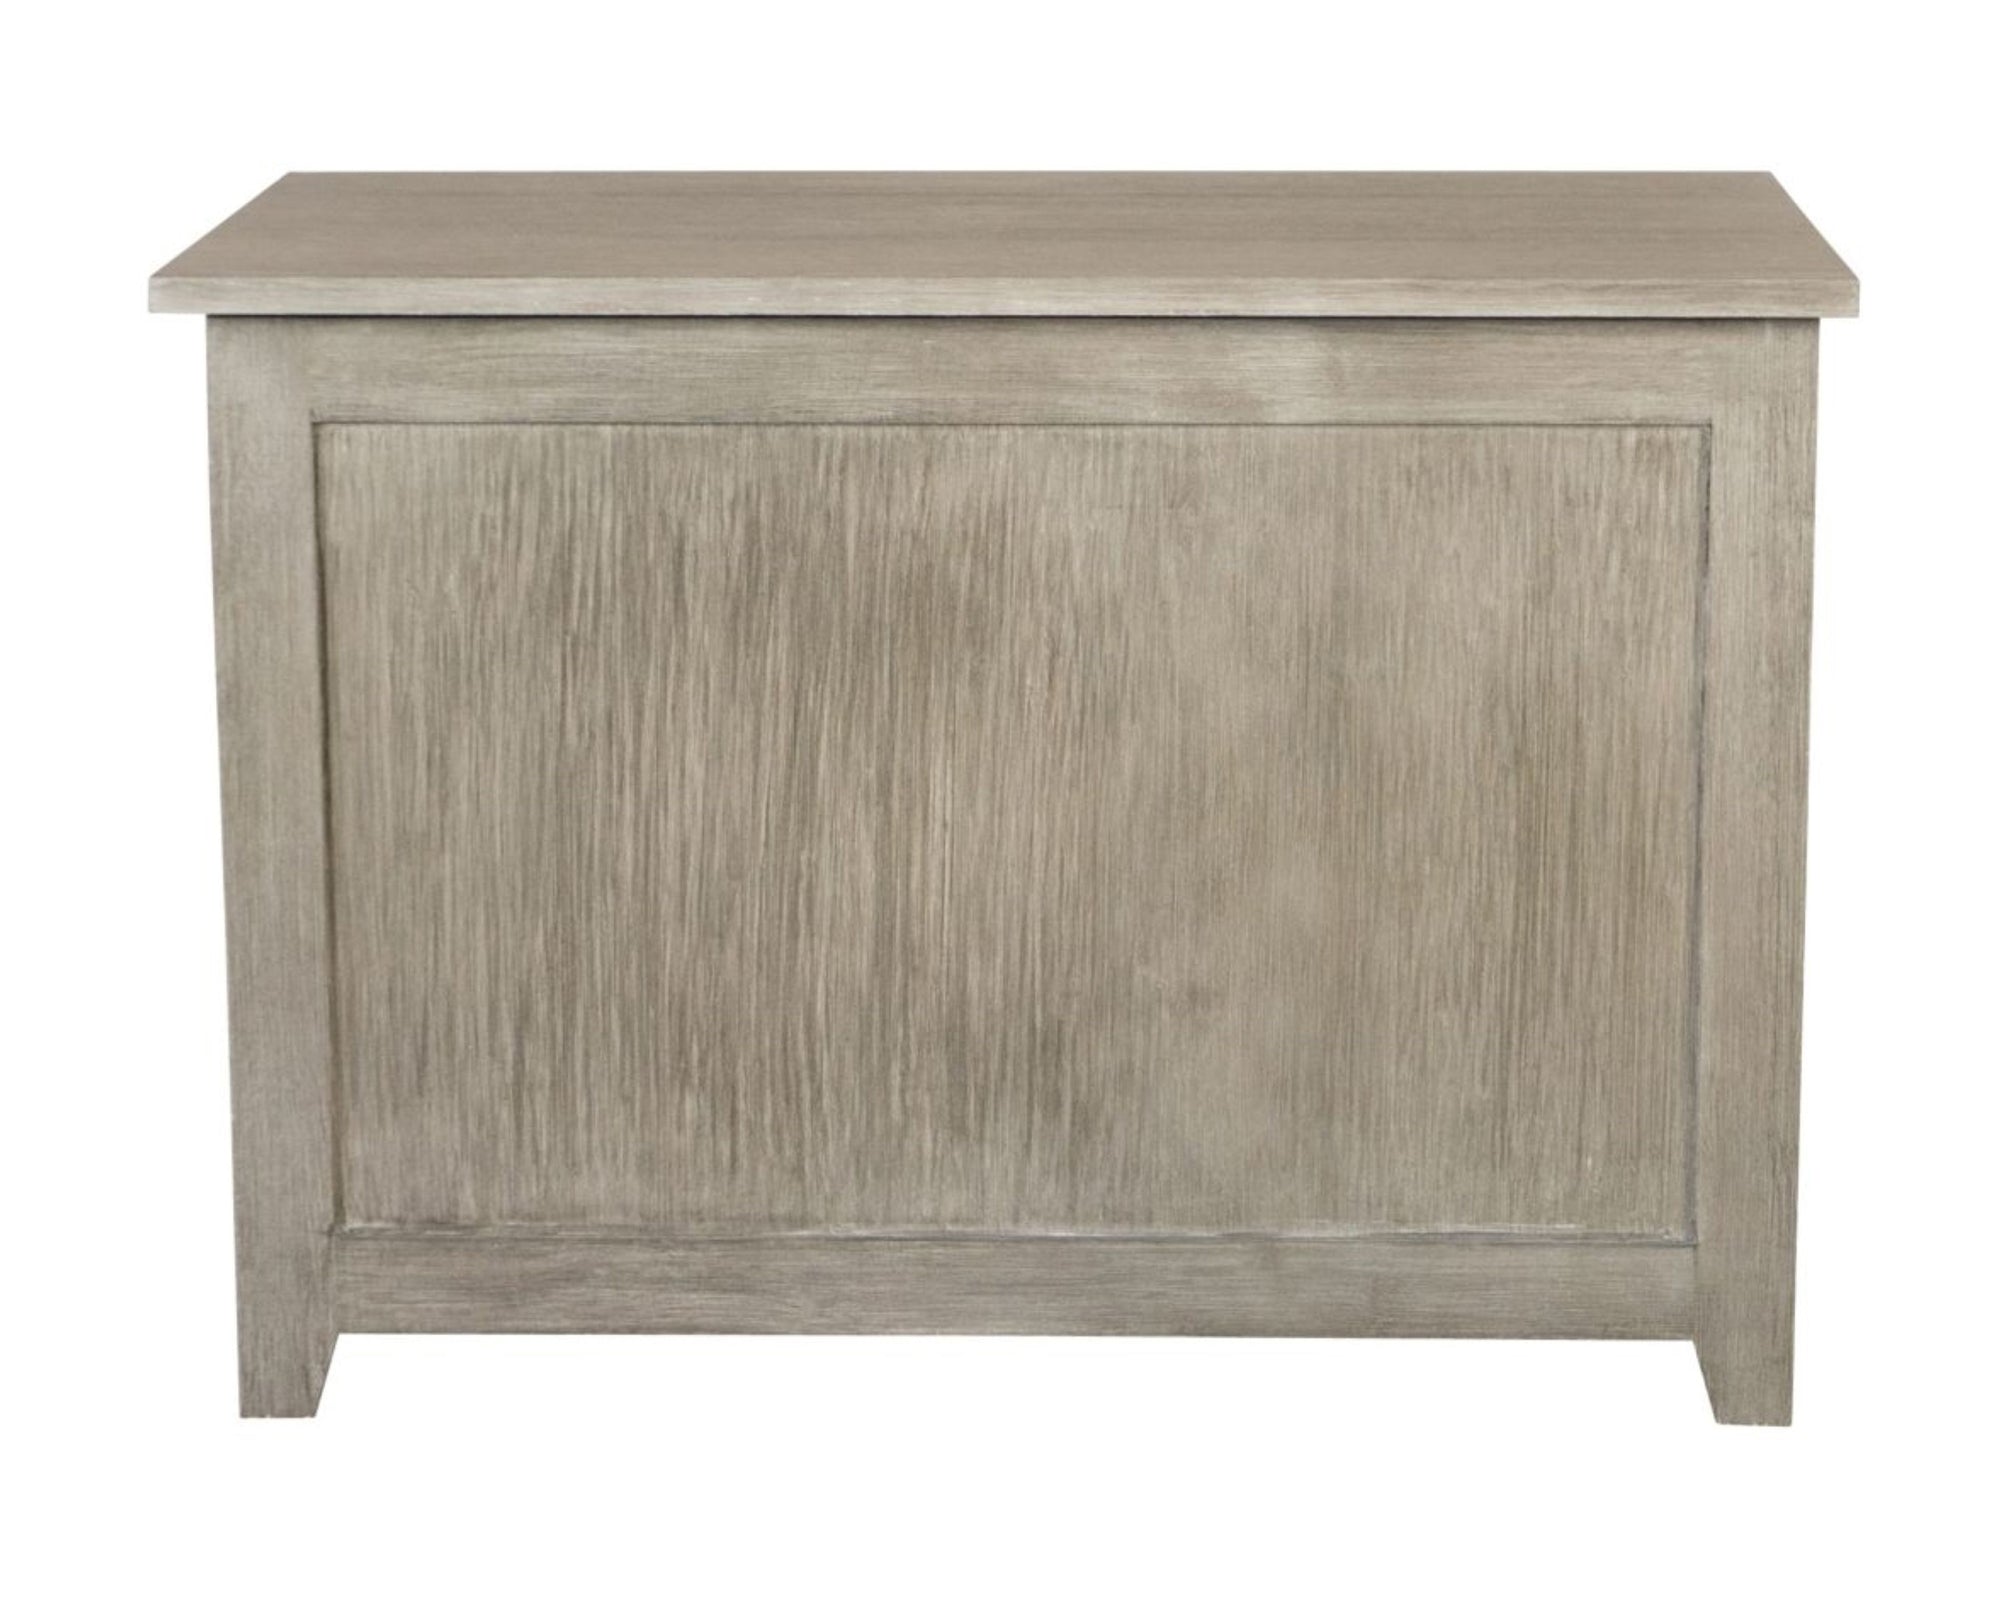 Eccostyle Solid Bamboo Storage Chest Bench - Brushed Gray